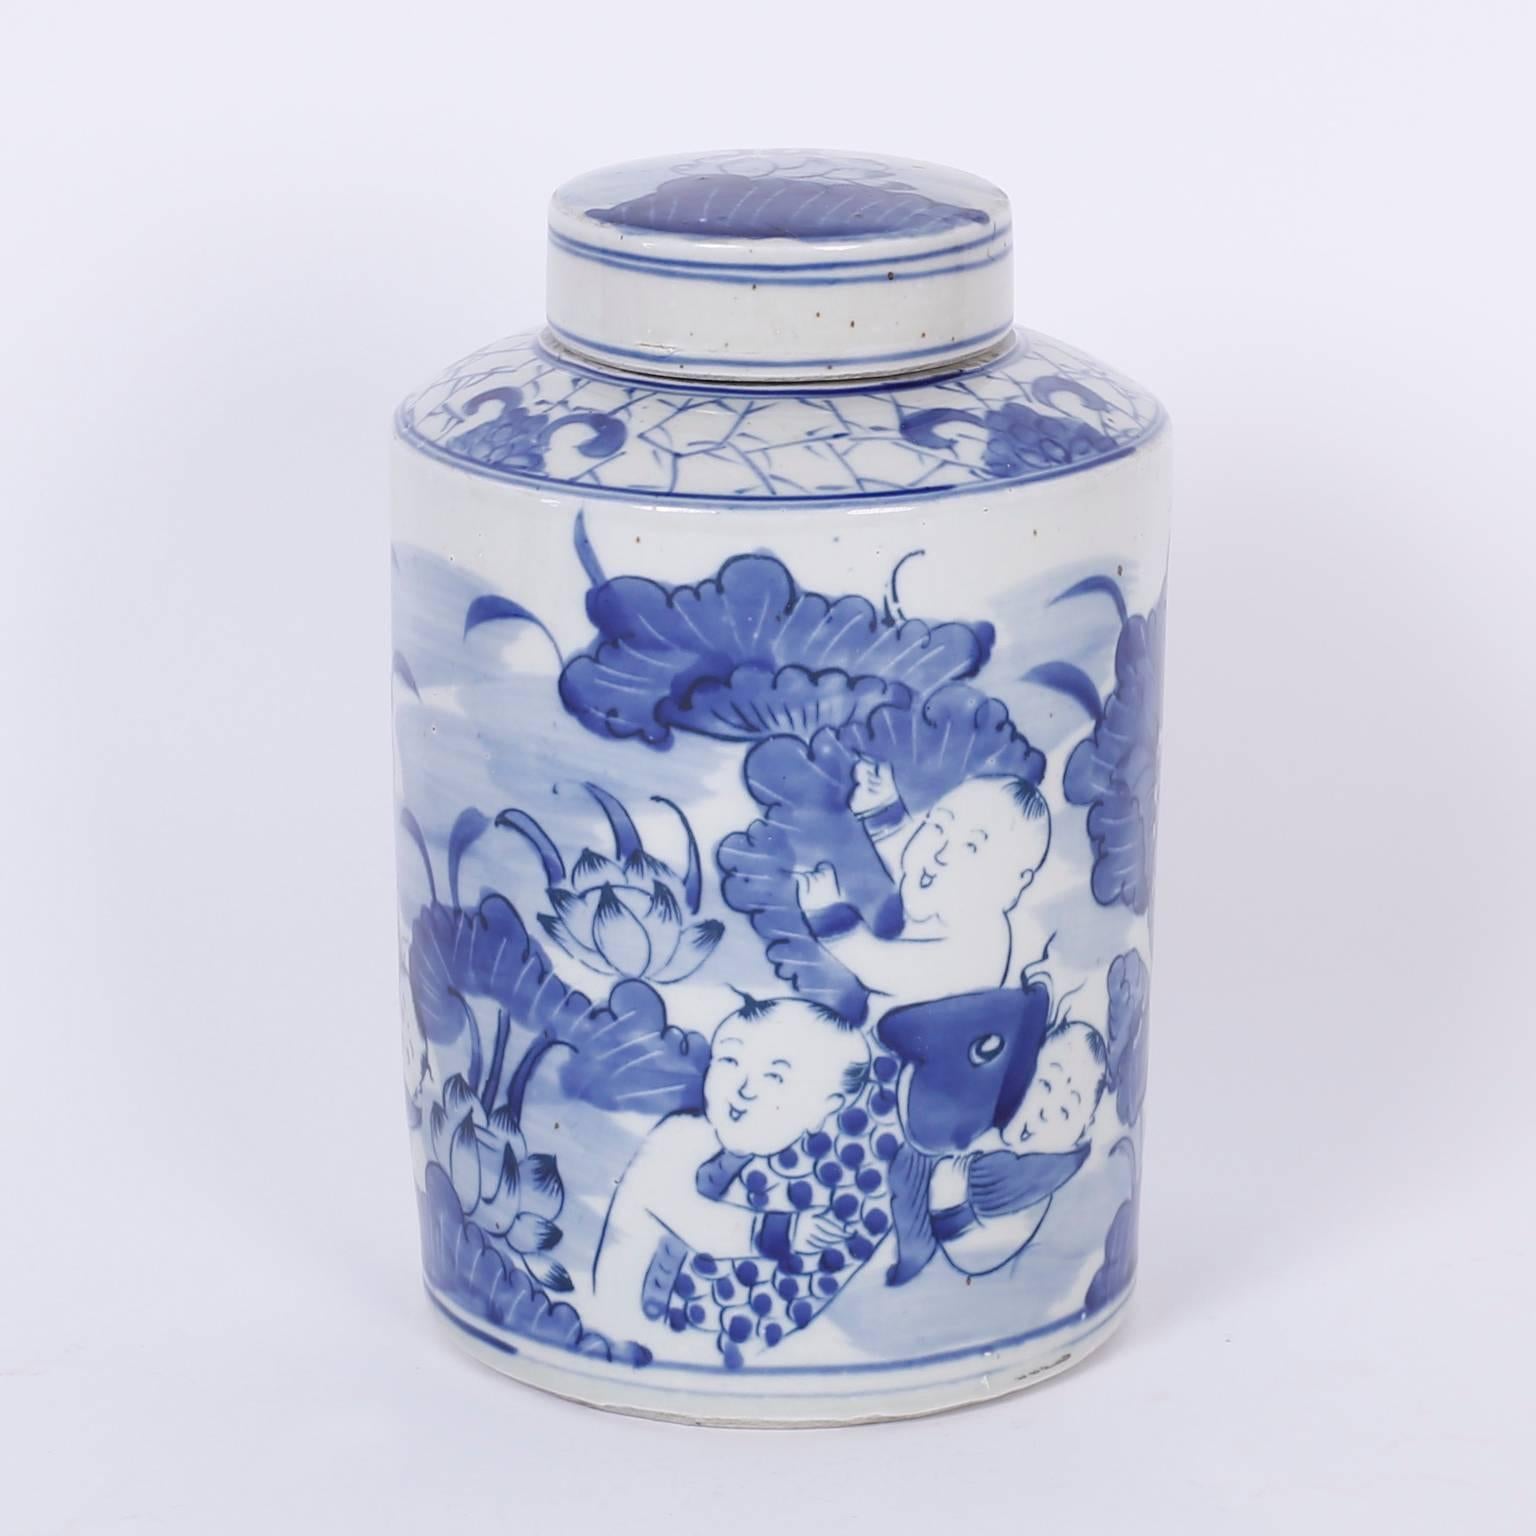 A pair of Chinese porcelain lidded jars decorated in Classic blue and white depicting children with fish and aquatic flora.
 